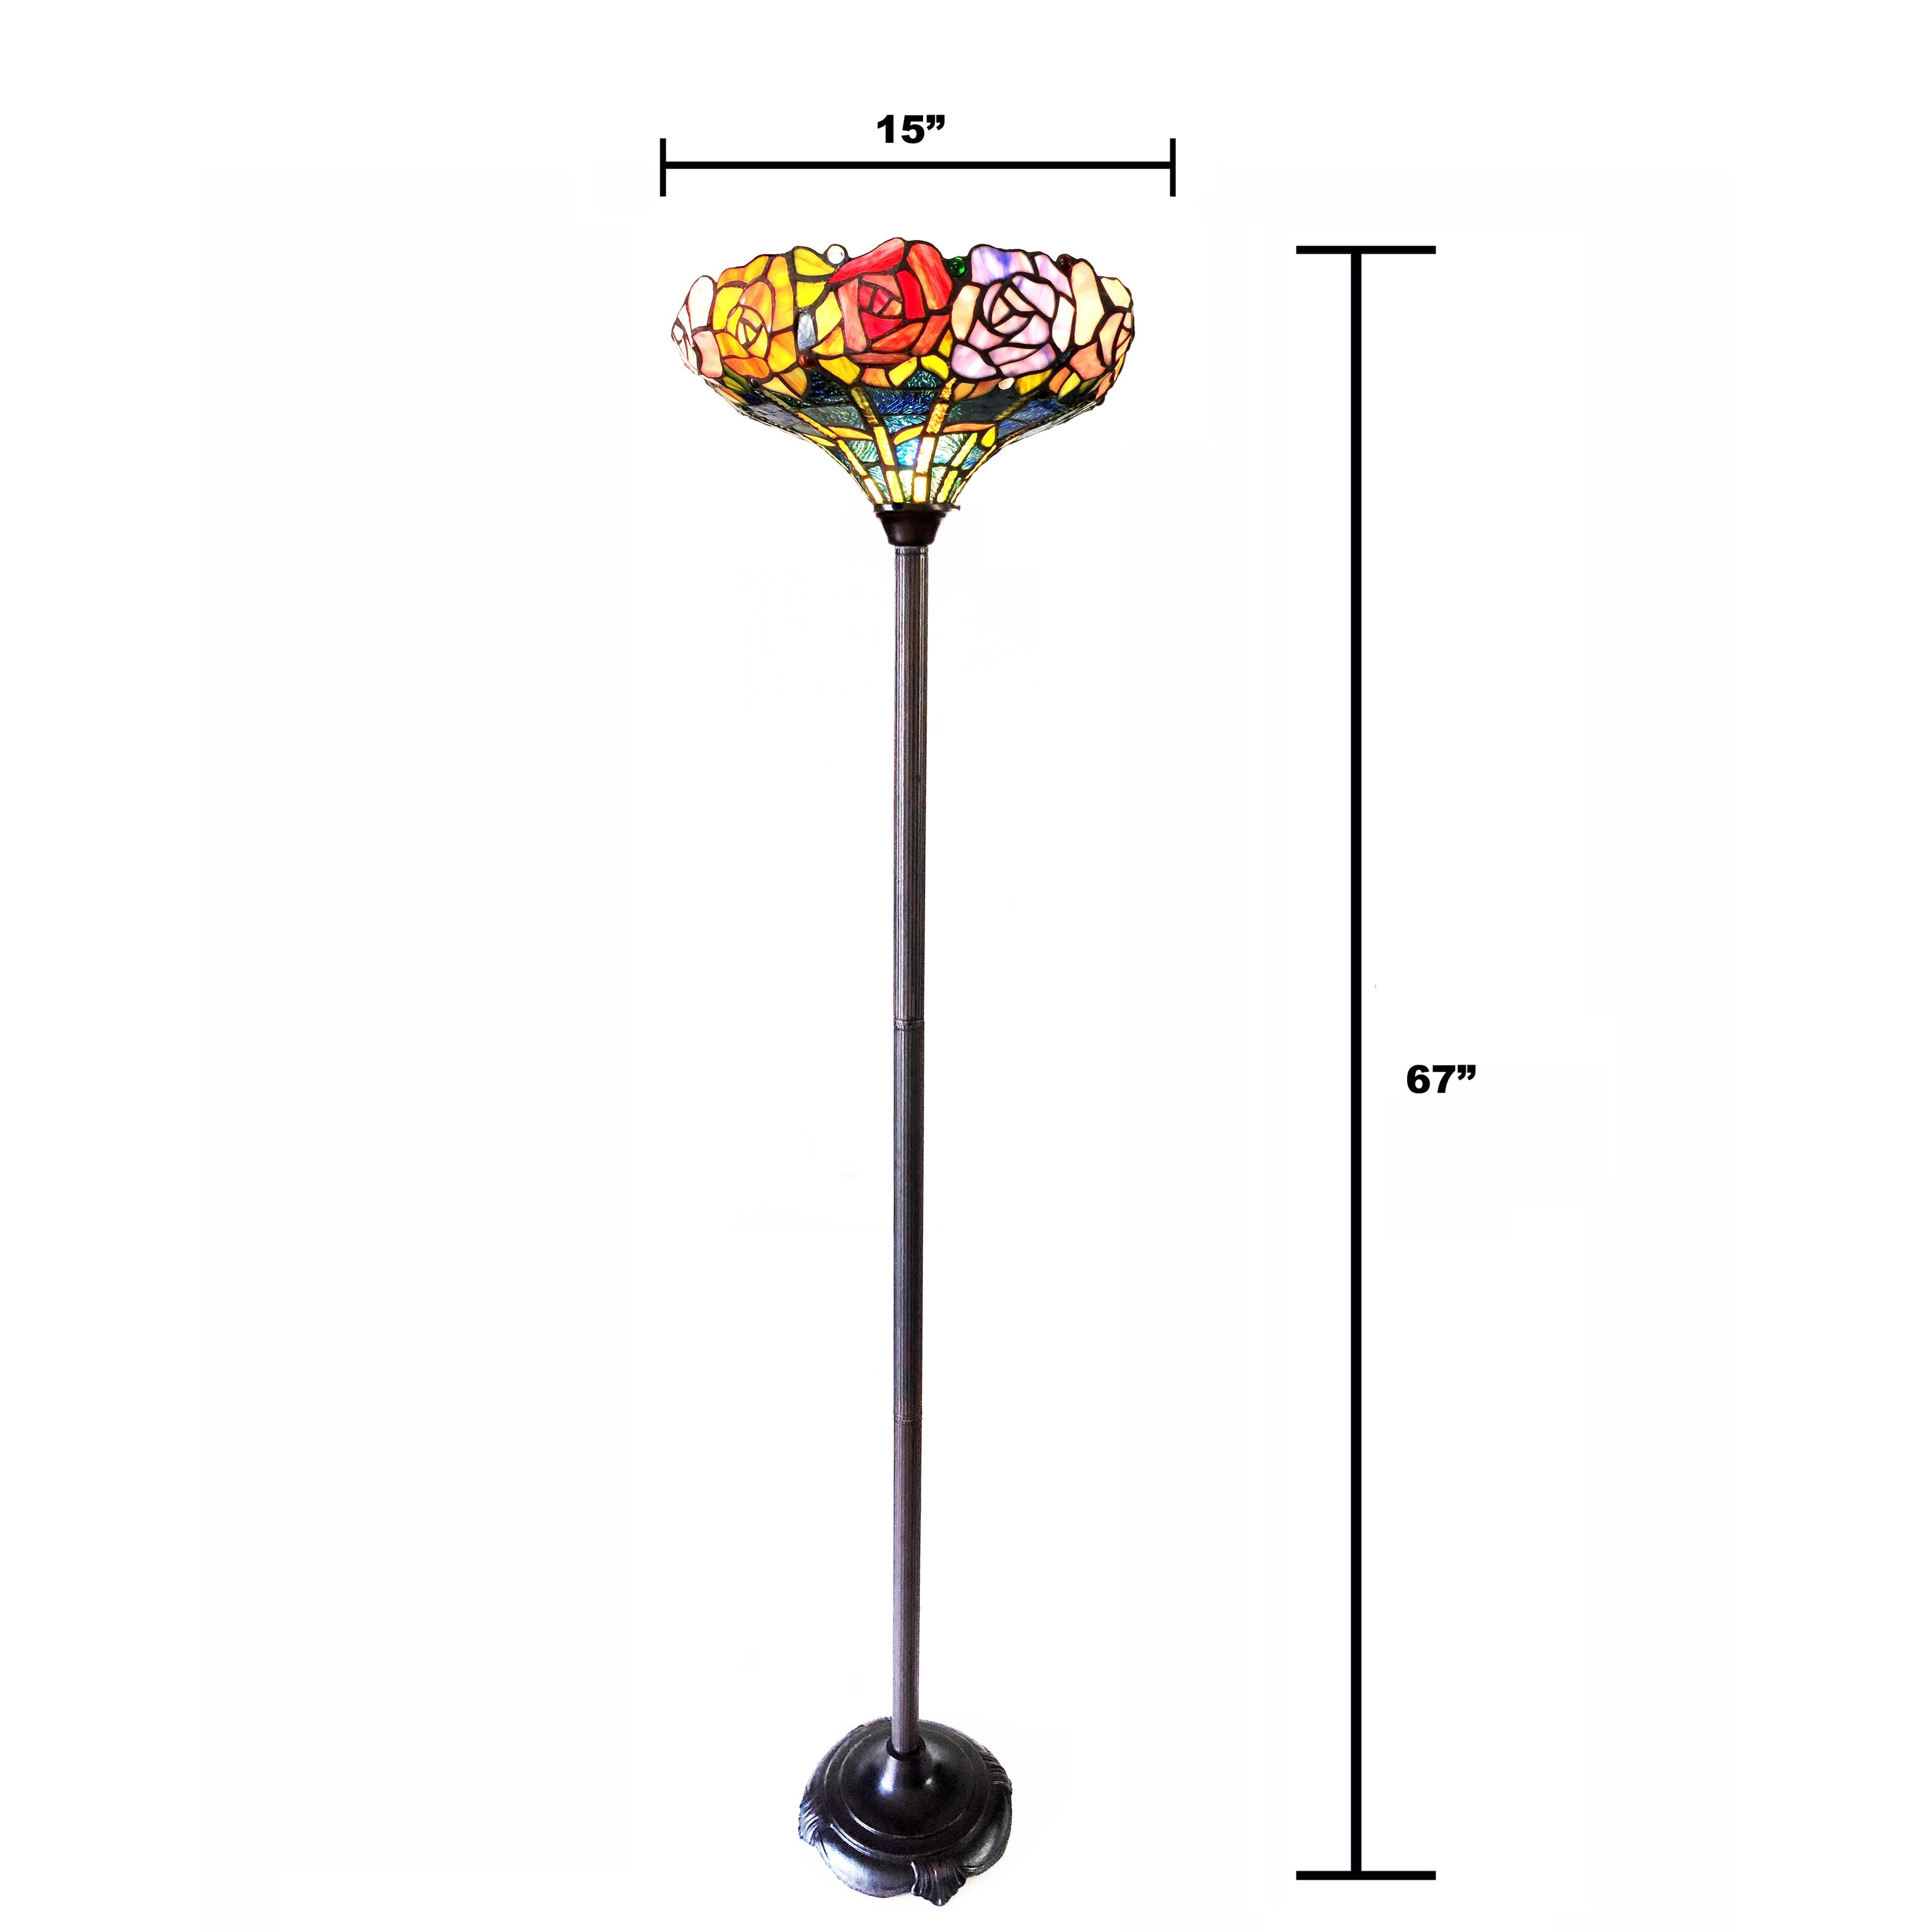 RADIANCE Goods -Style Floral Stained Glass Torchiere Floor Lamp 67" Height